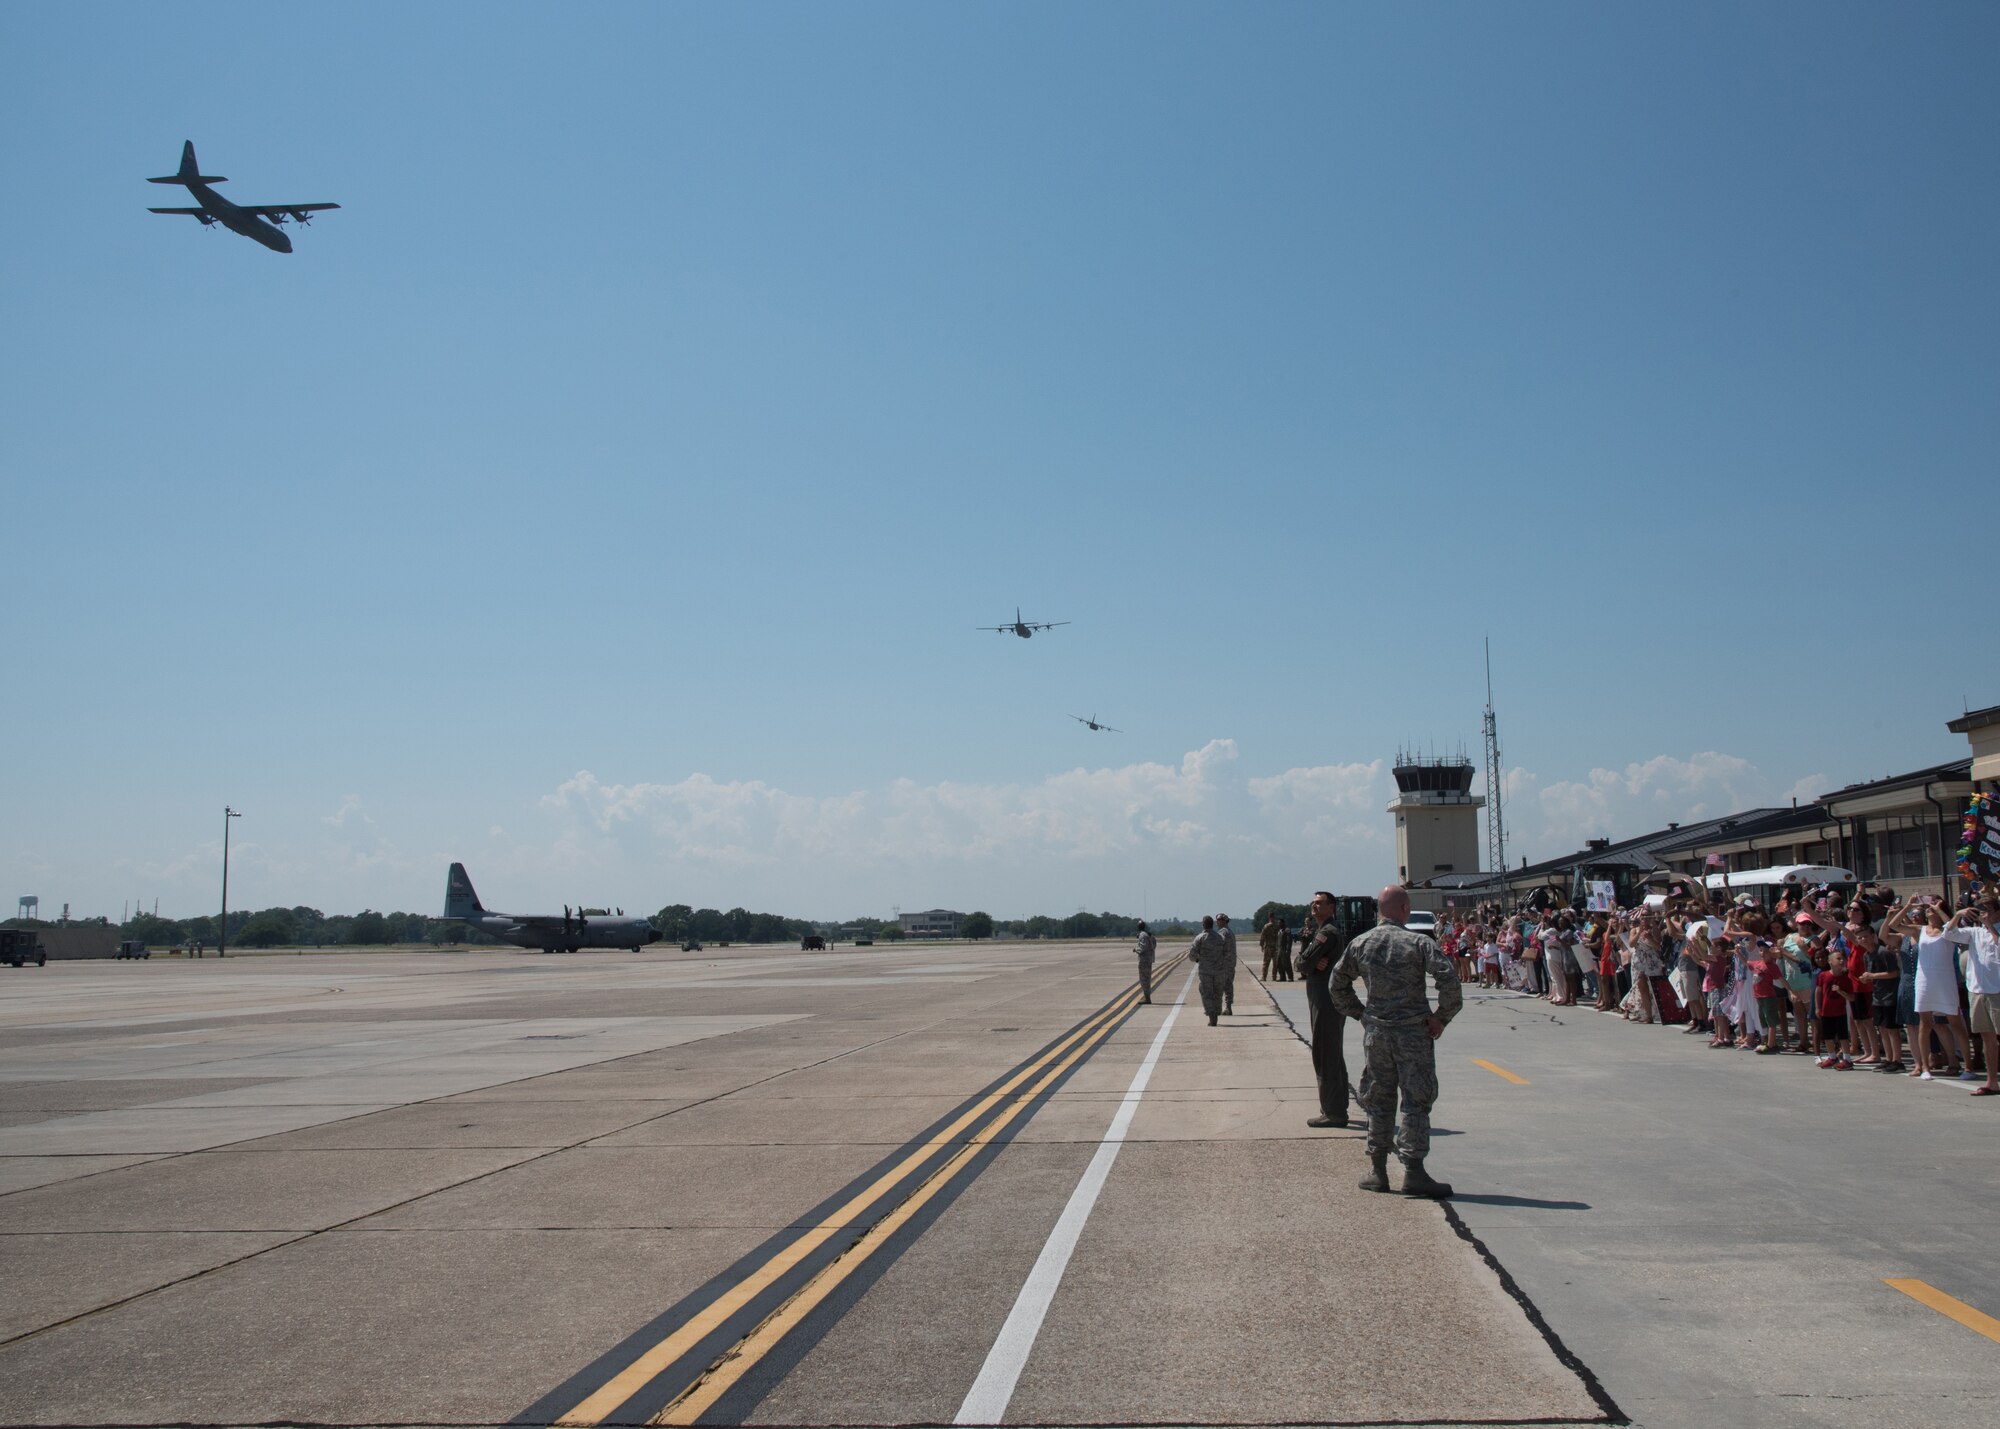 Air Force reservists with the 403rd Wing, Keesler Air Force Base, Mississippi, arrive in a four-ship C-130J Super Hercules formation. The aircraft were flown by 815th Airlift Squadron crews who, along with several wing members, returned from a deployment to Southwest Asia in support of Operations Freedom Sentinel and Inherent Resolve. (U.S. Air Force photo/Maj. Marnee A.C. Losurdo)